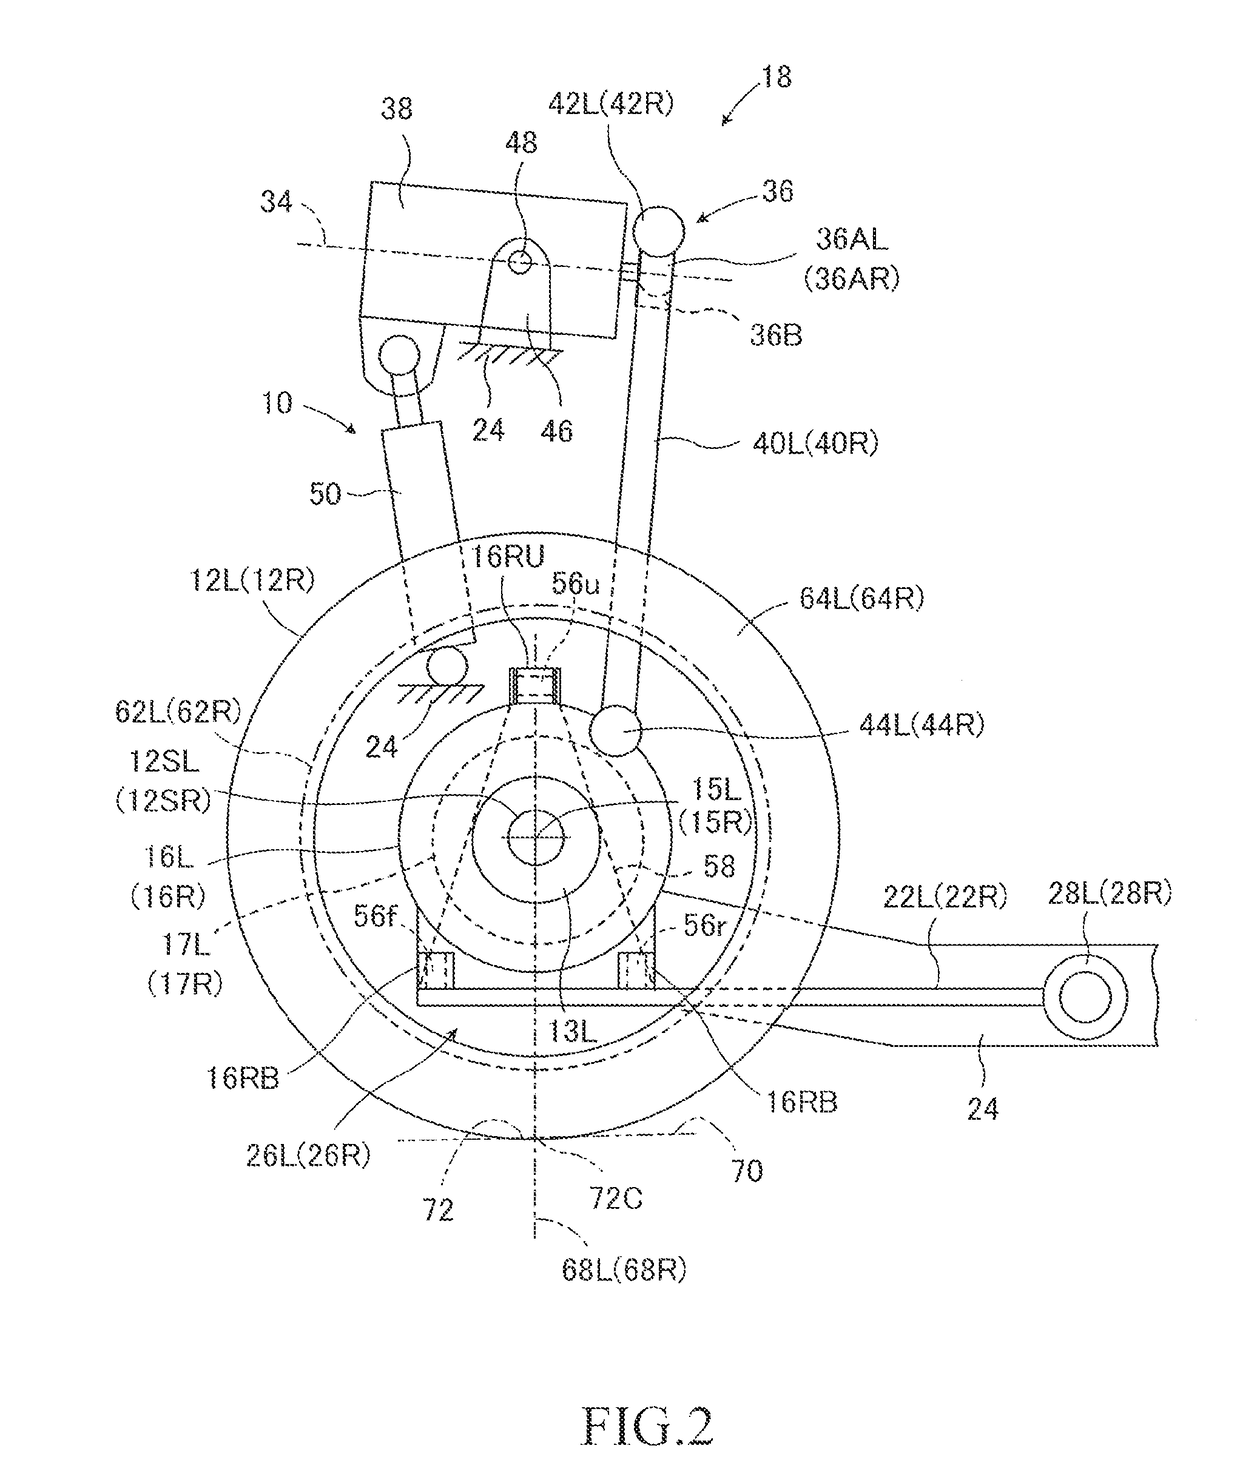 Suspension device for non-steered driving wheel incorporating in-wheel motor